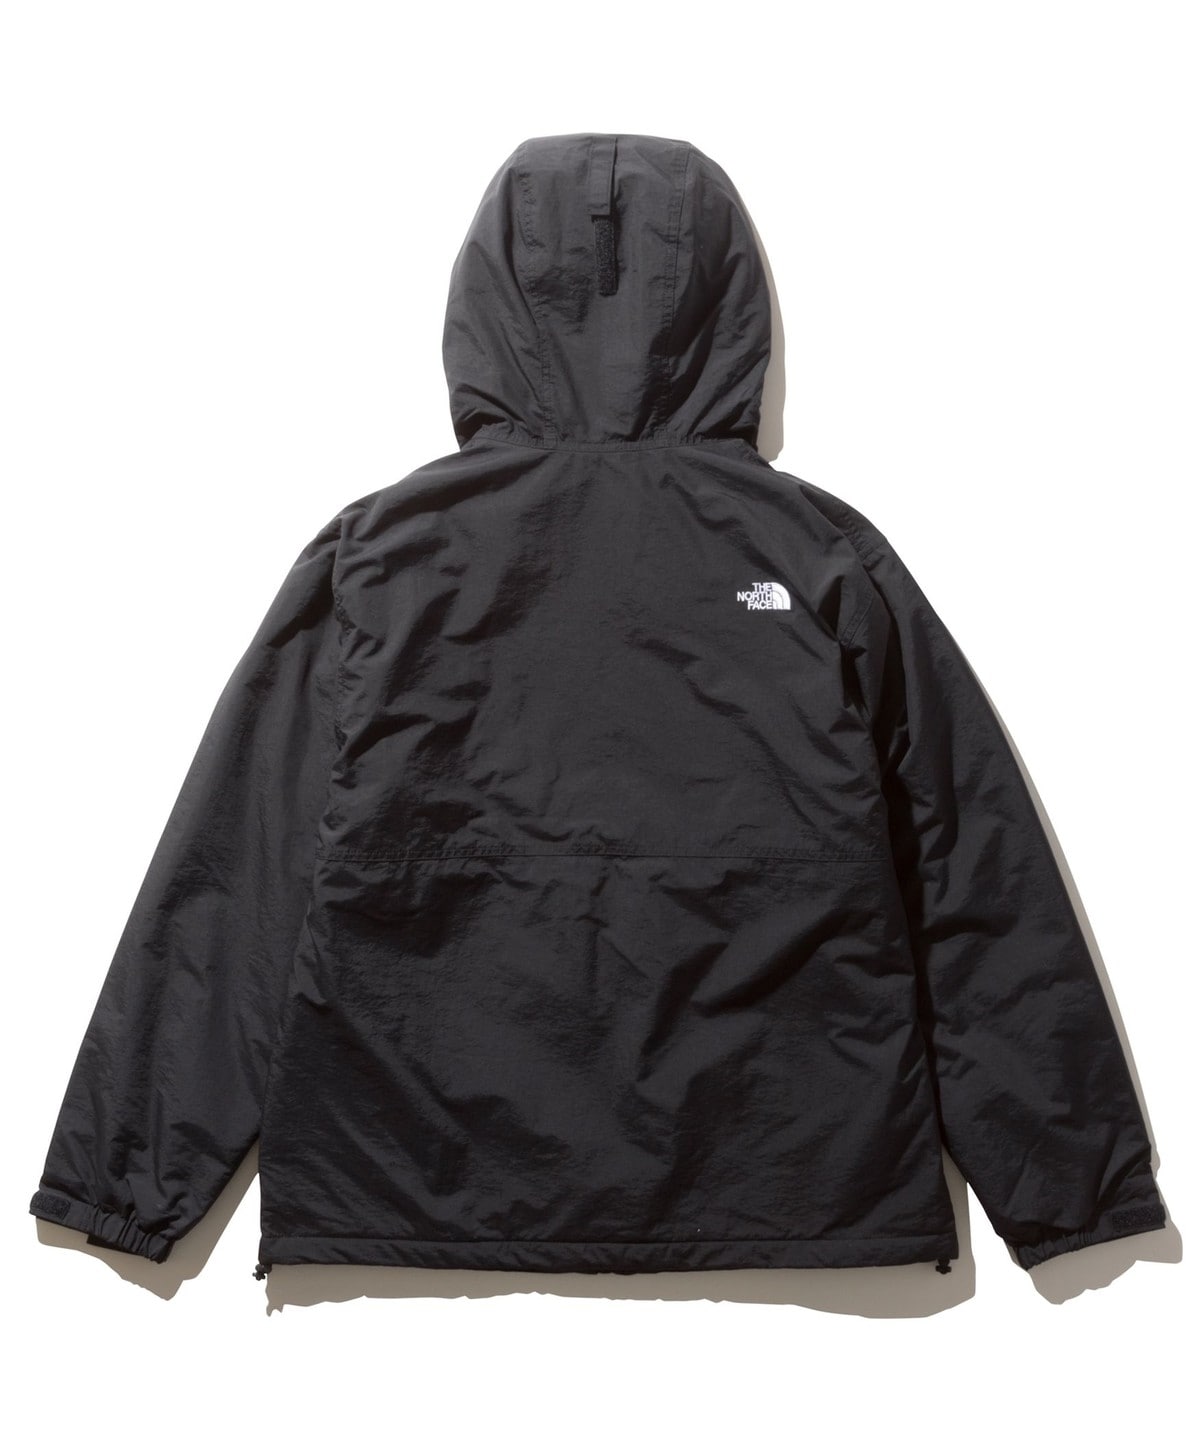 THE NORTH FACE: COMPACT NOMAD JACKET/コンパクト ノマド ジャケット: アウター/ジャケット SHIPS